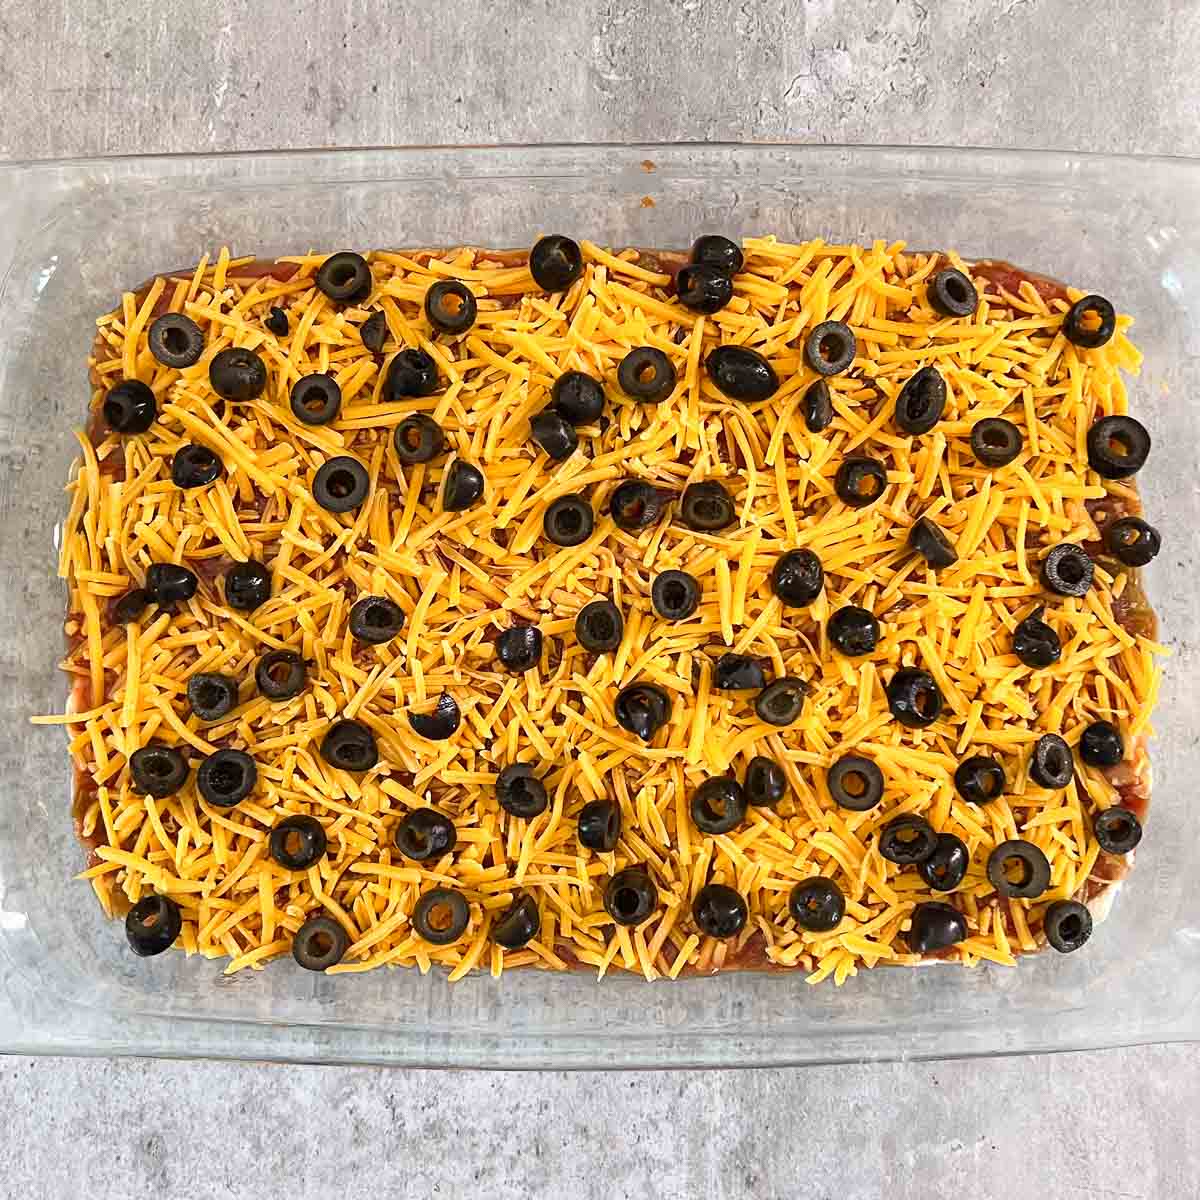 black olives spread over shredded cheese